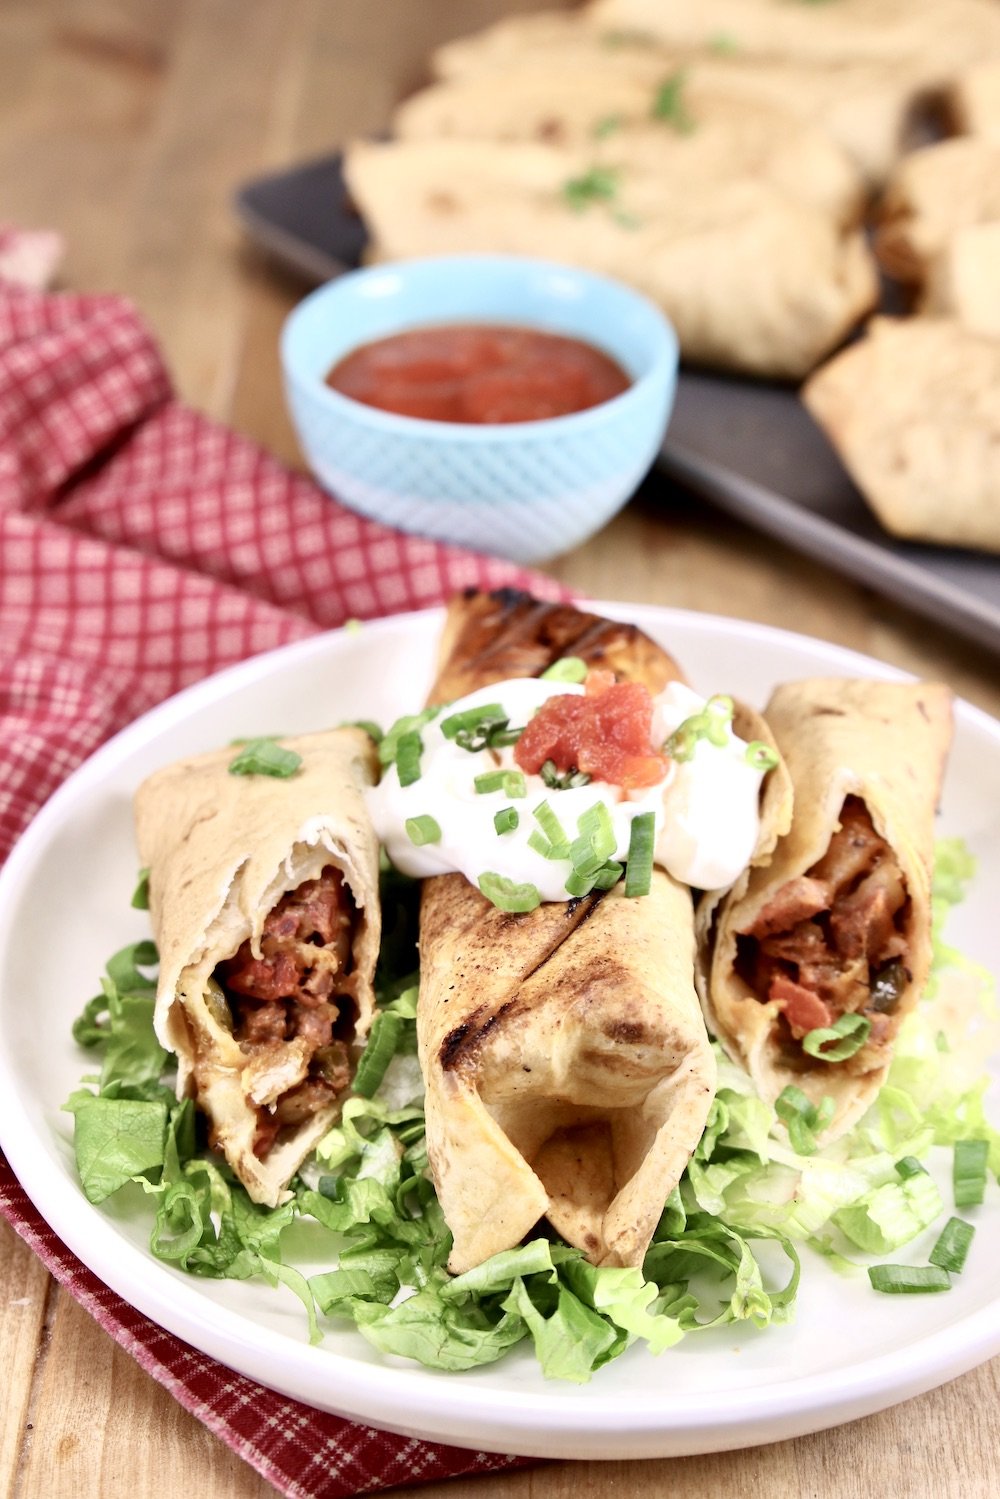 Short Rib Burritos on a plate - one whole, one cut in half with filling showing. On a bed of lettuce, topped with sour cream and salsa